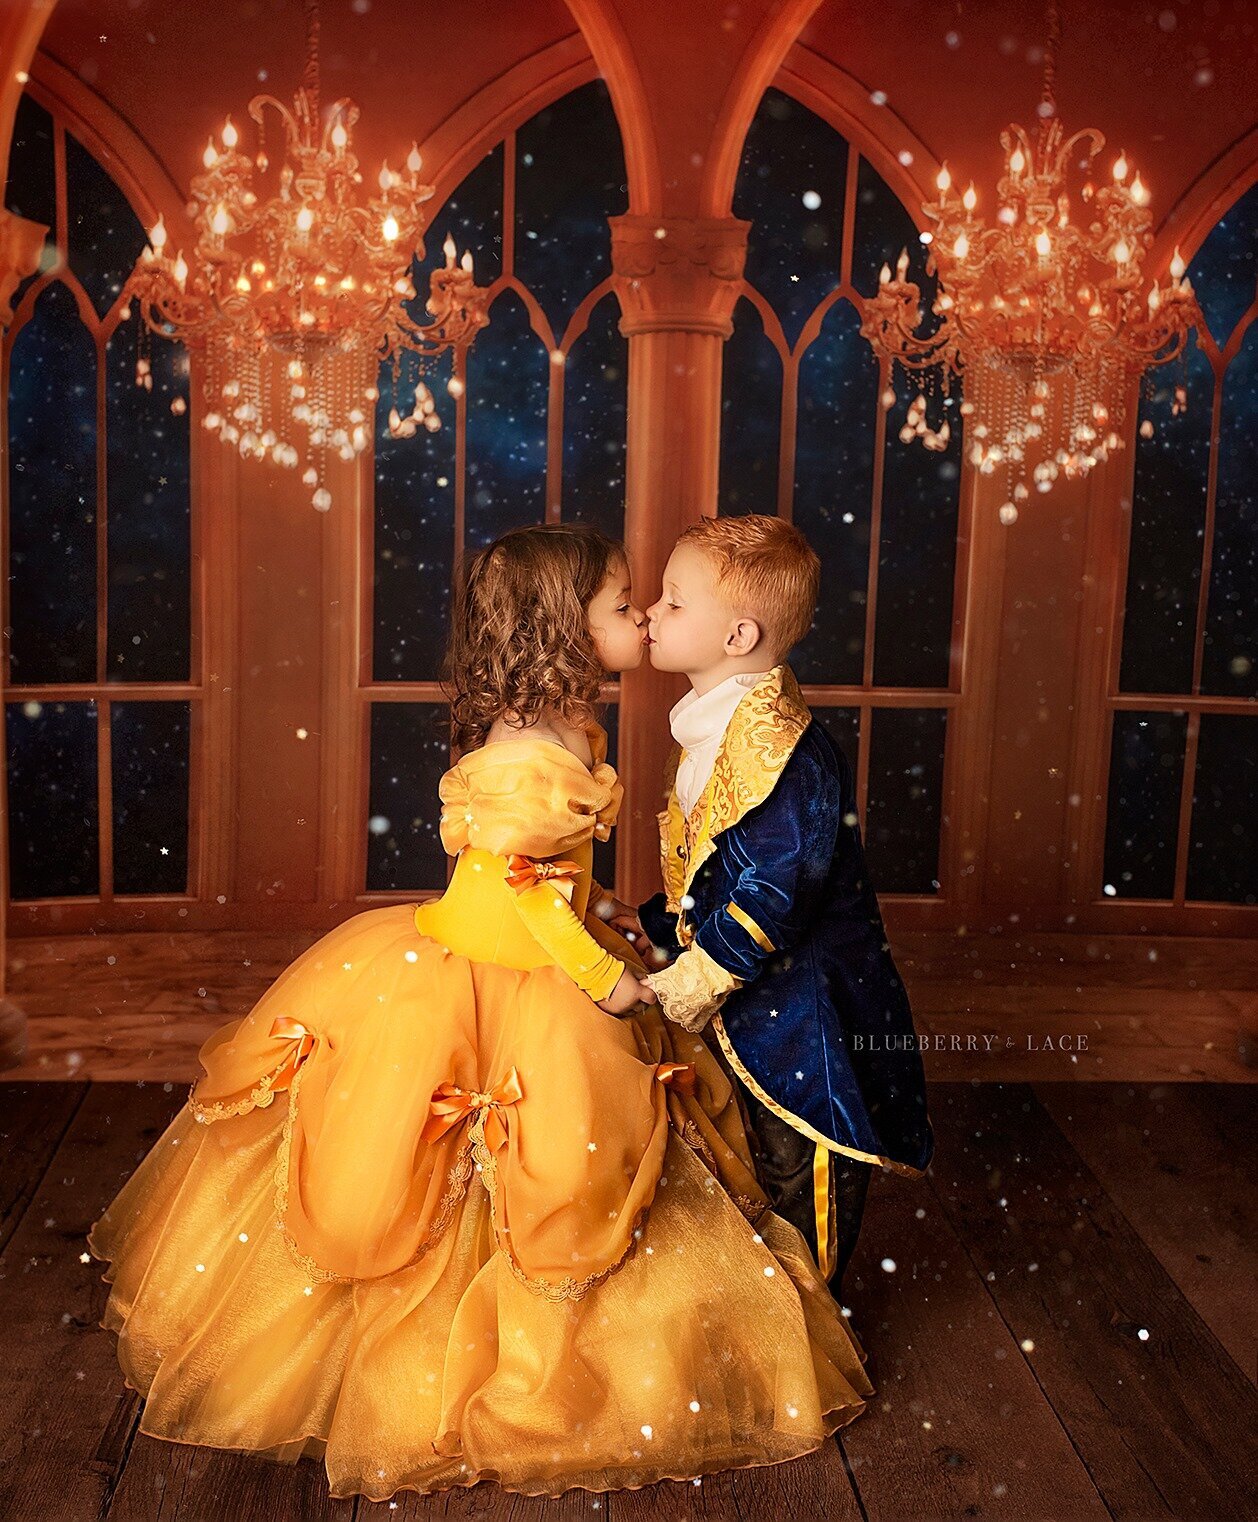 beauty and the beast photo session in oswego, ny. we provide the ball gown and boy outfit for your session